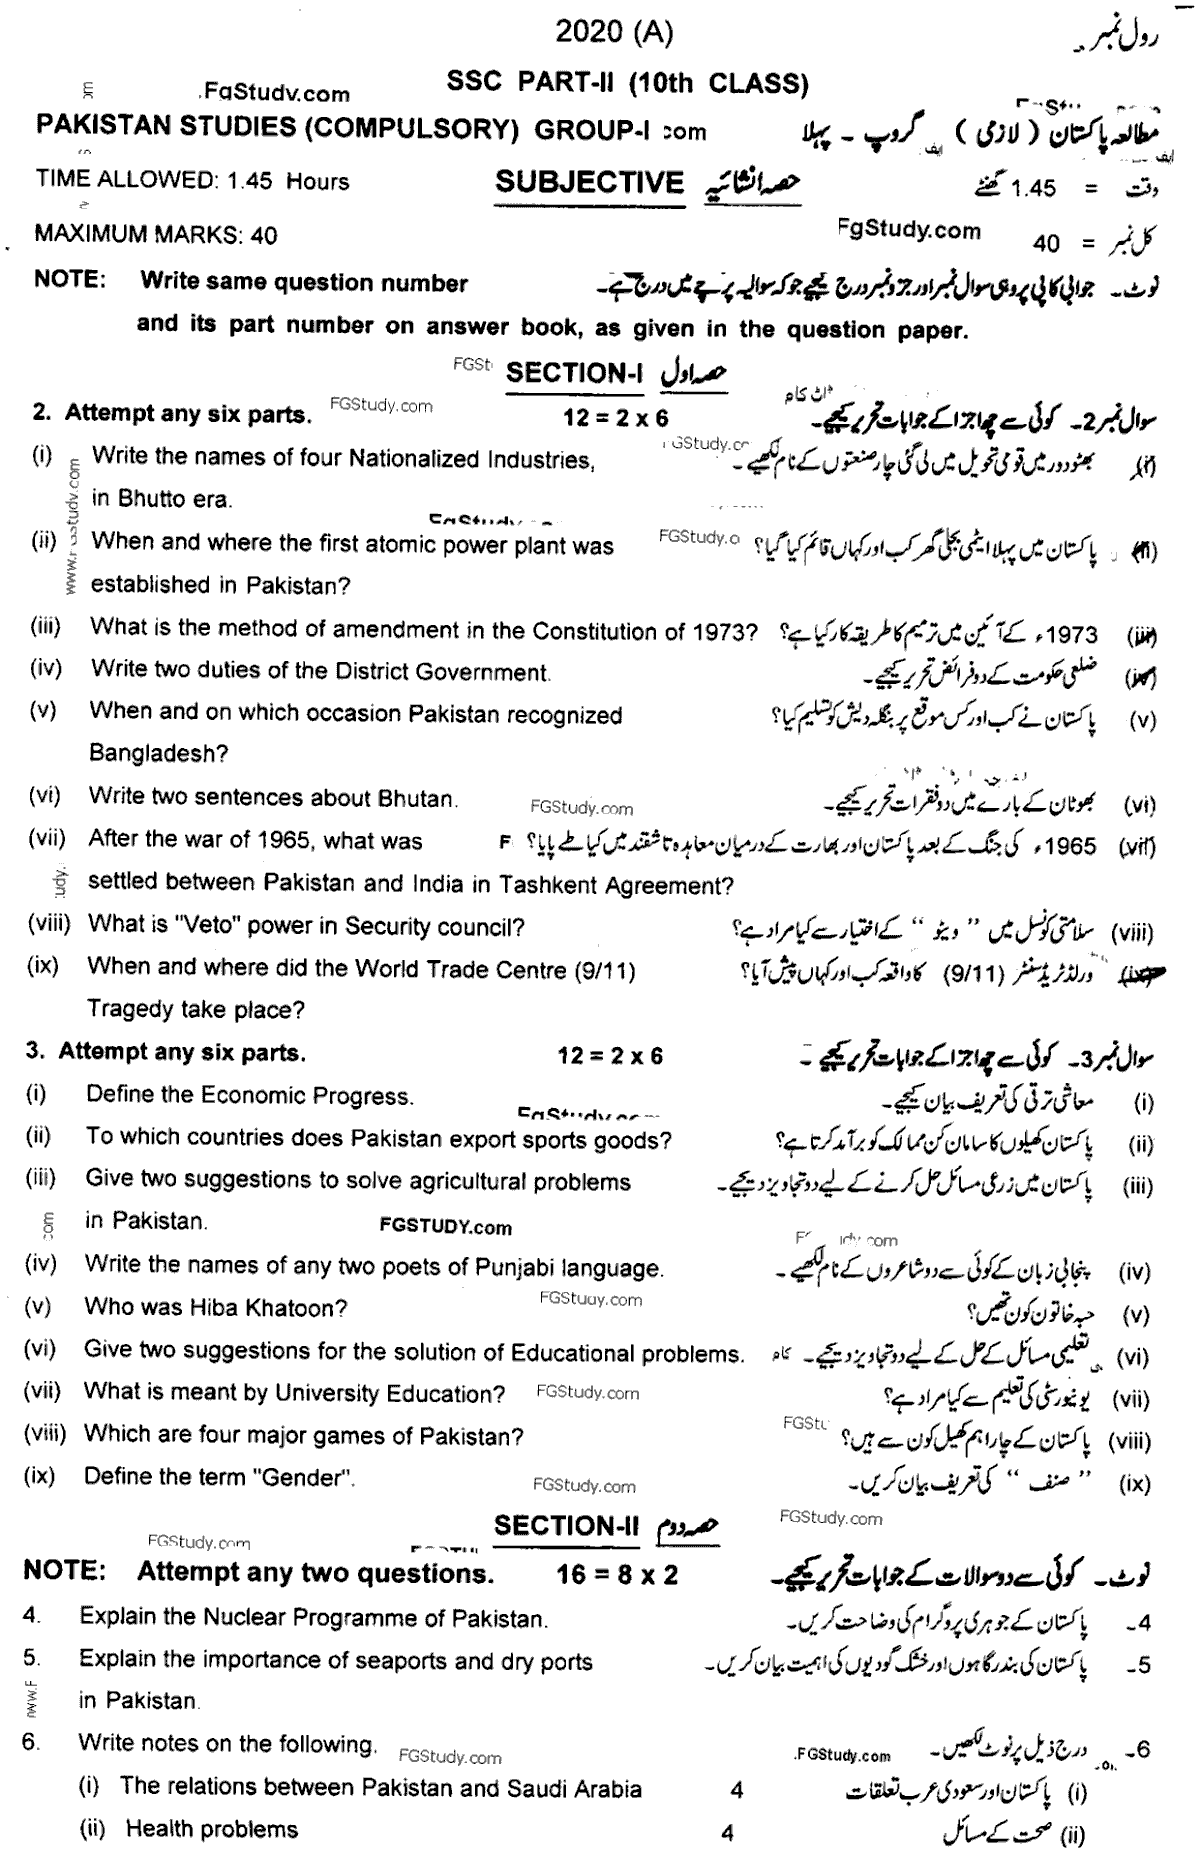 Pak Studies Group 1 Subjective 10th Class Past Papers 2020